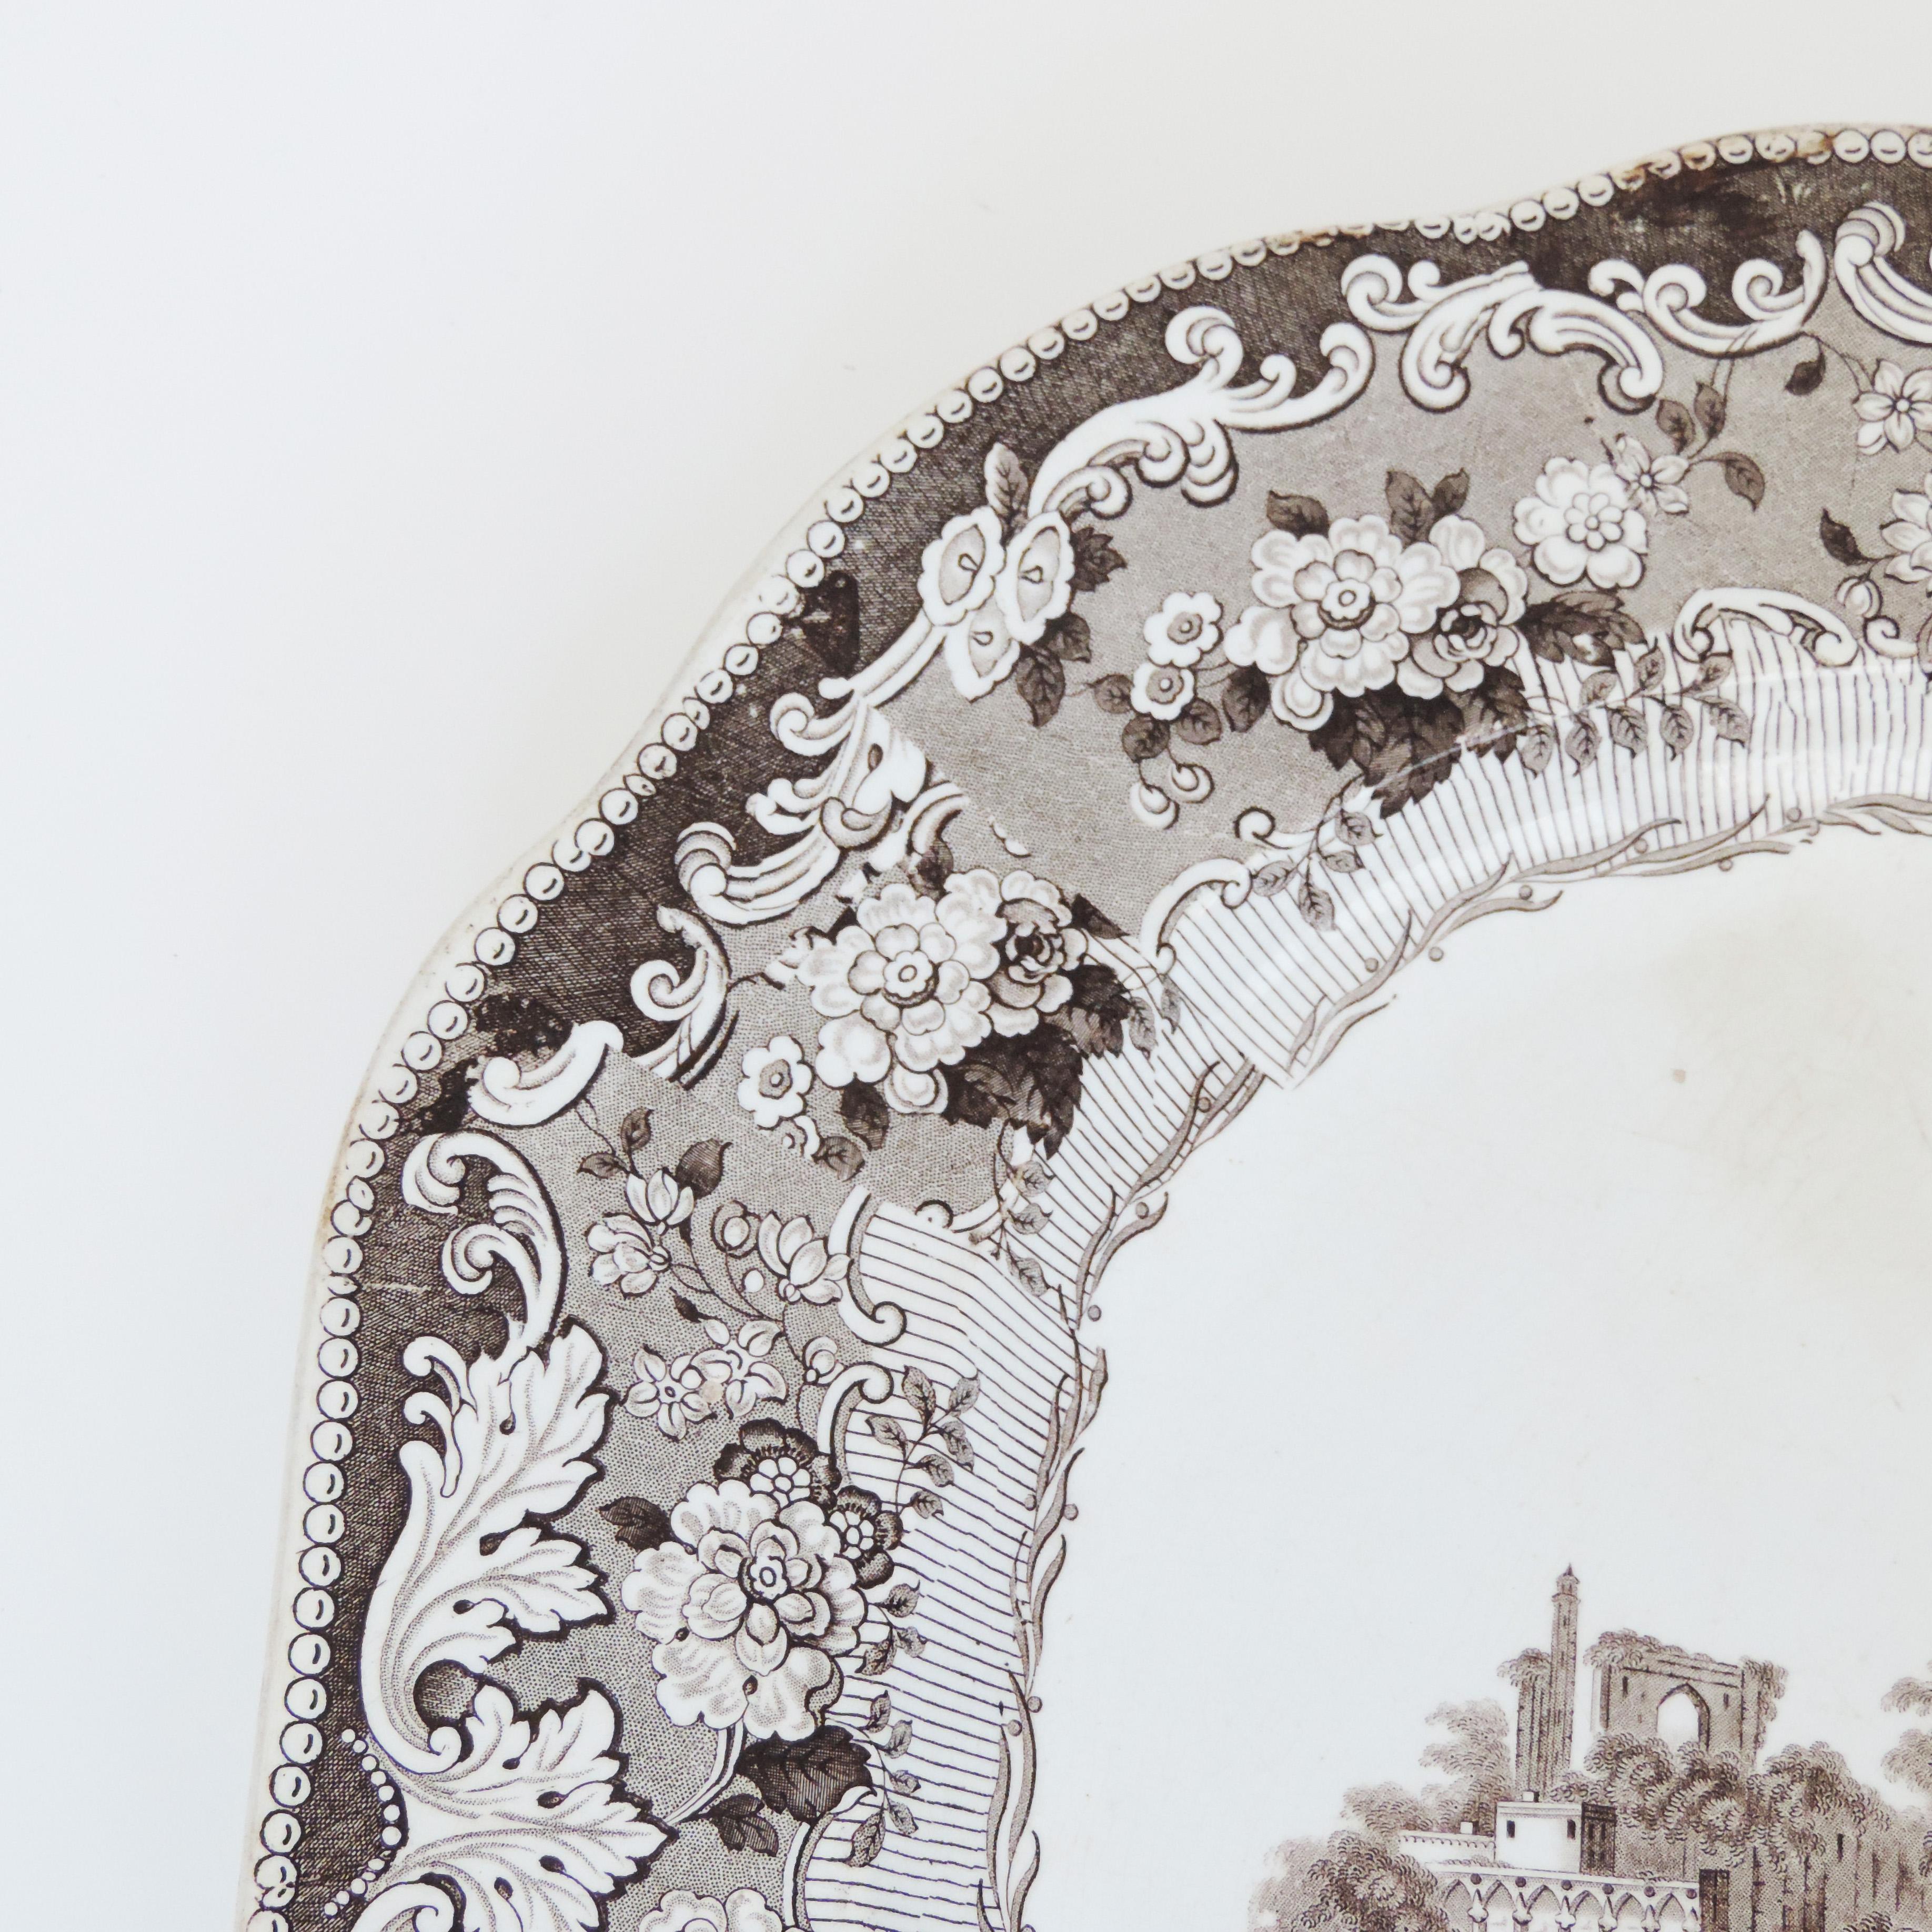 Aesthetic Movement Monumental Brown Transferware Serving Plate, England, 1880s